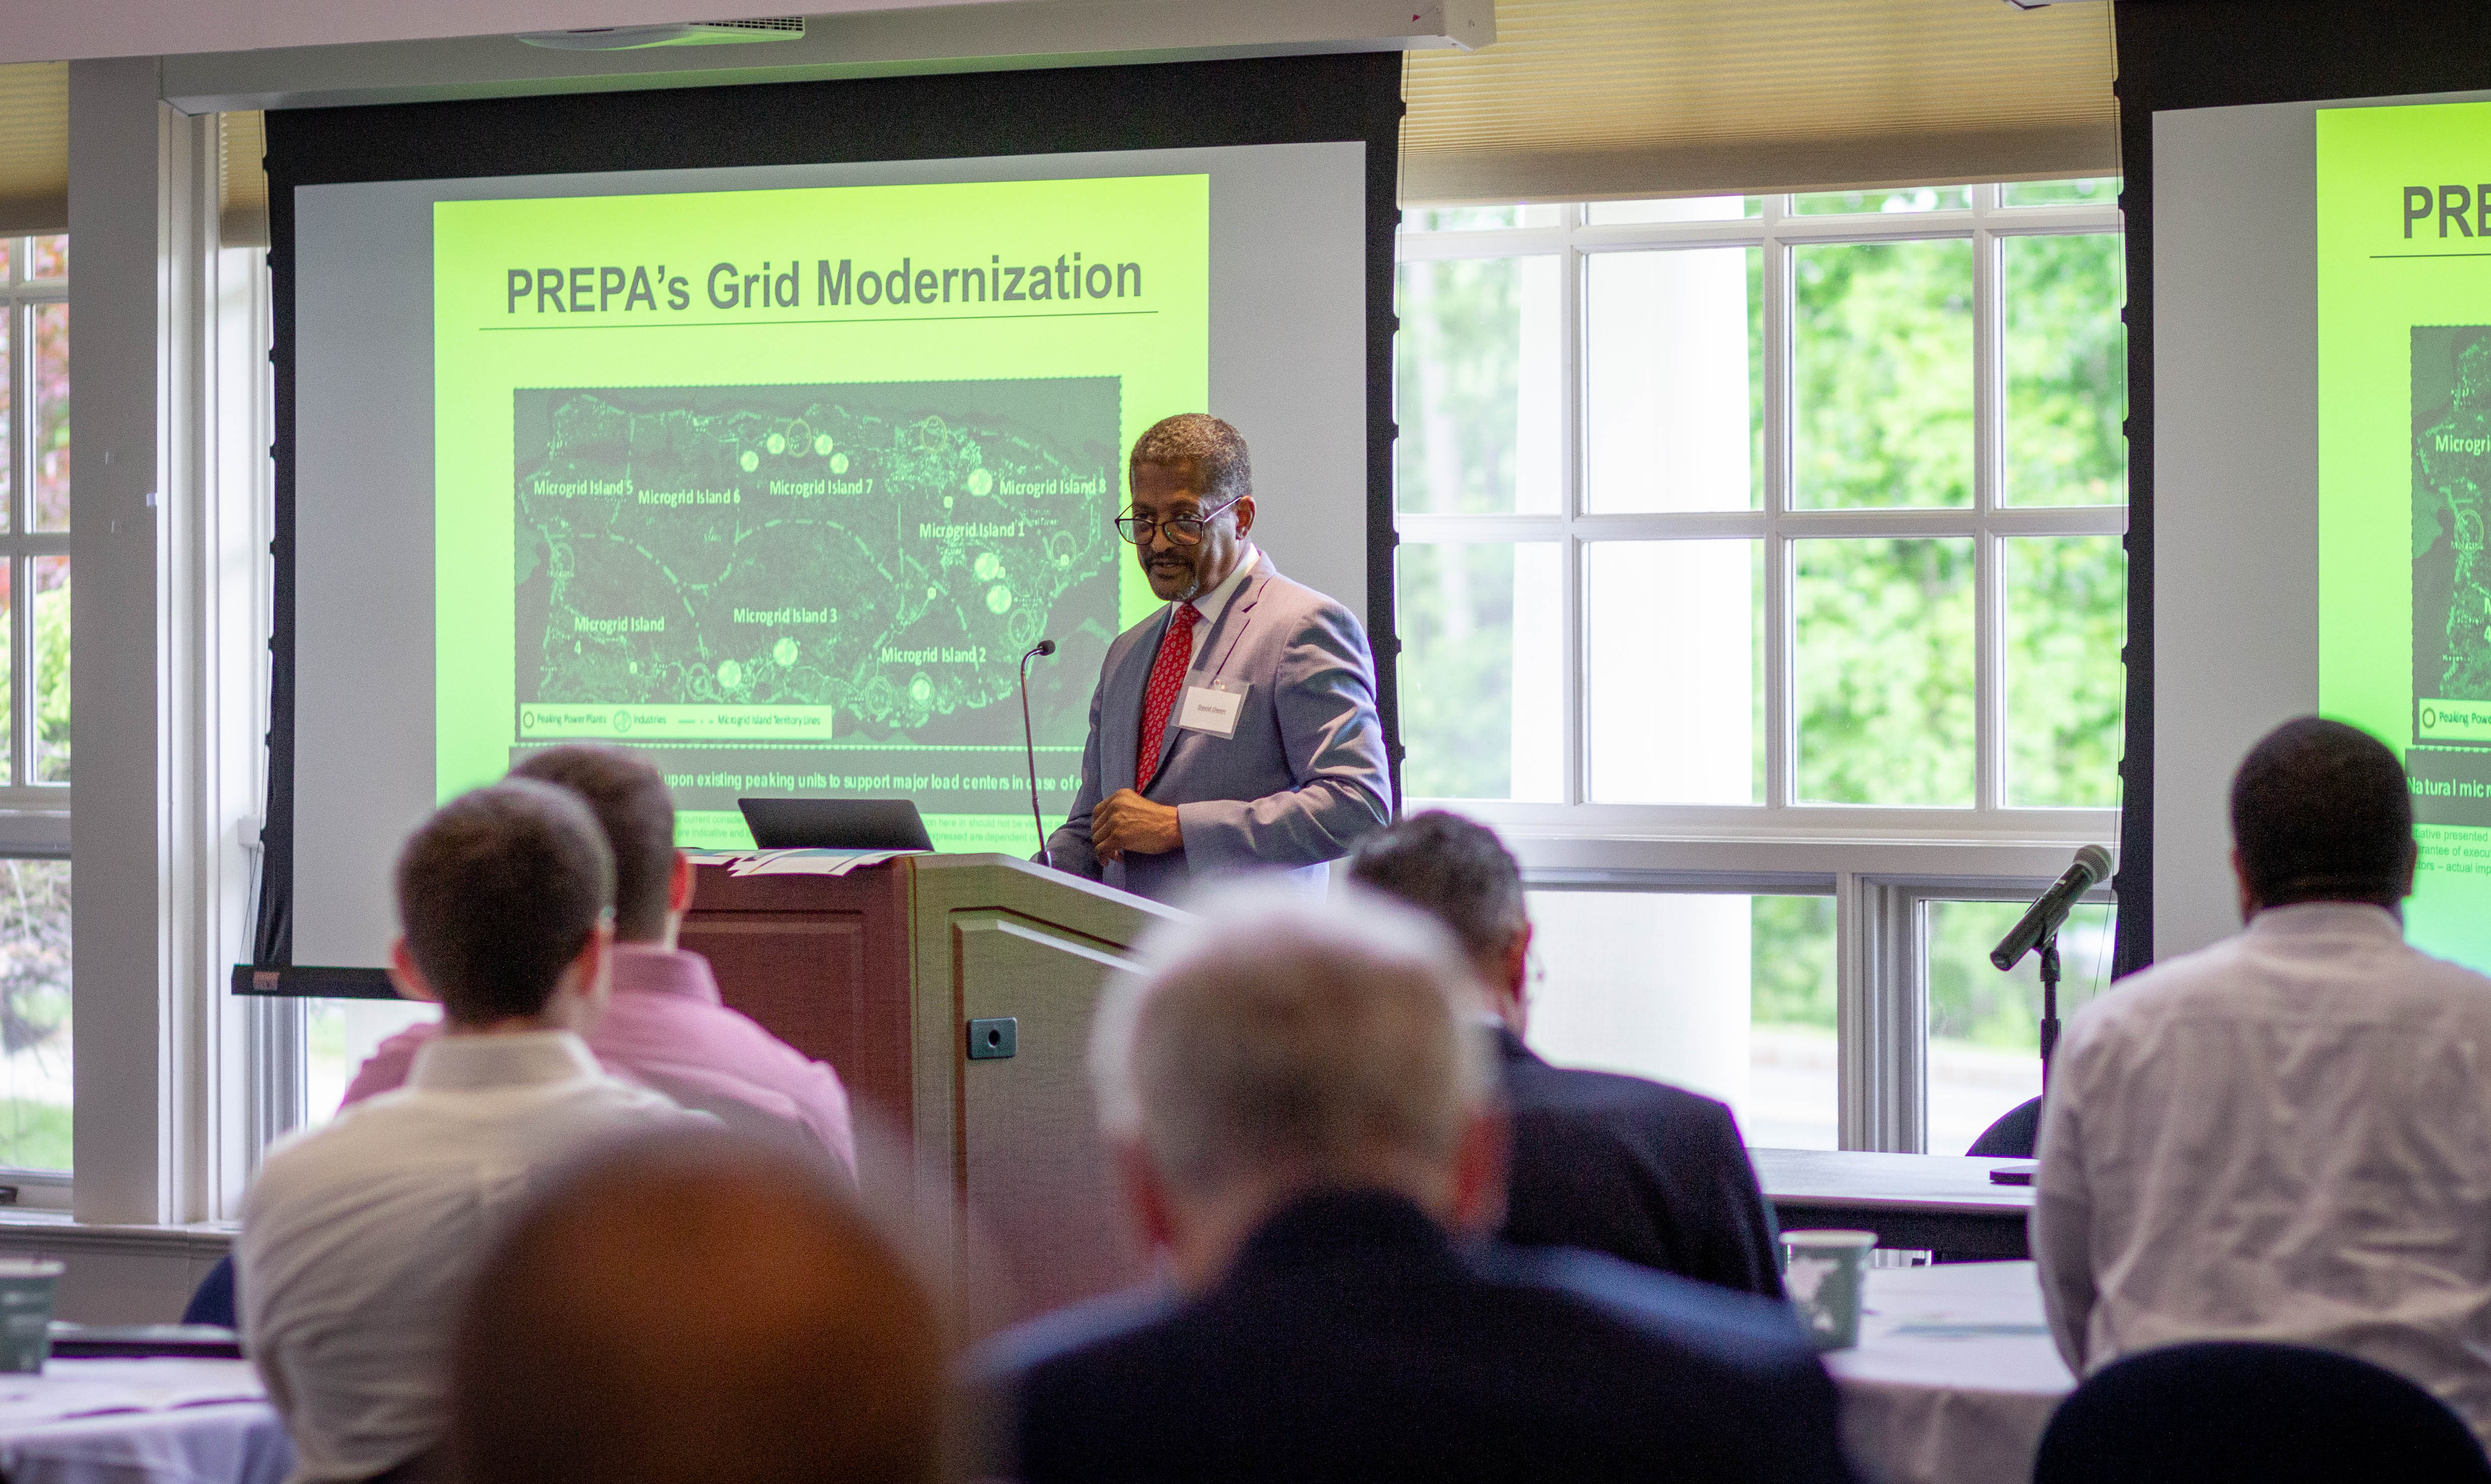 David Owens, retired Executive VP of the Edison Electric Institute at the Eversource Energy Center's Grid Modernization Summit on June 6, 2019. (Christopher Larosa/UConn Photo).